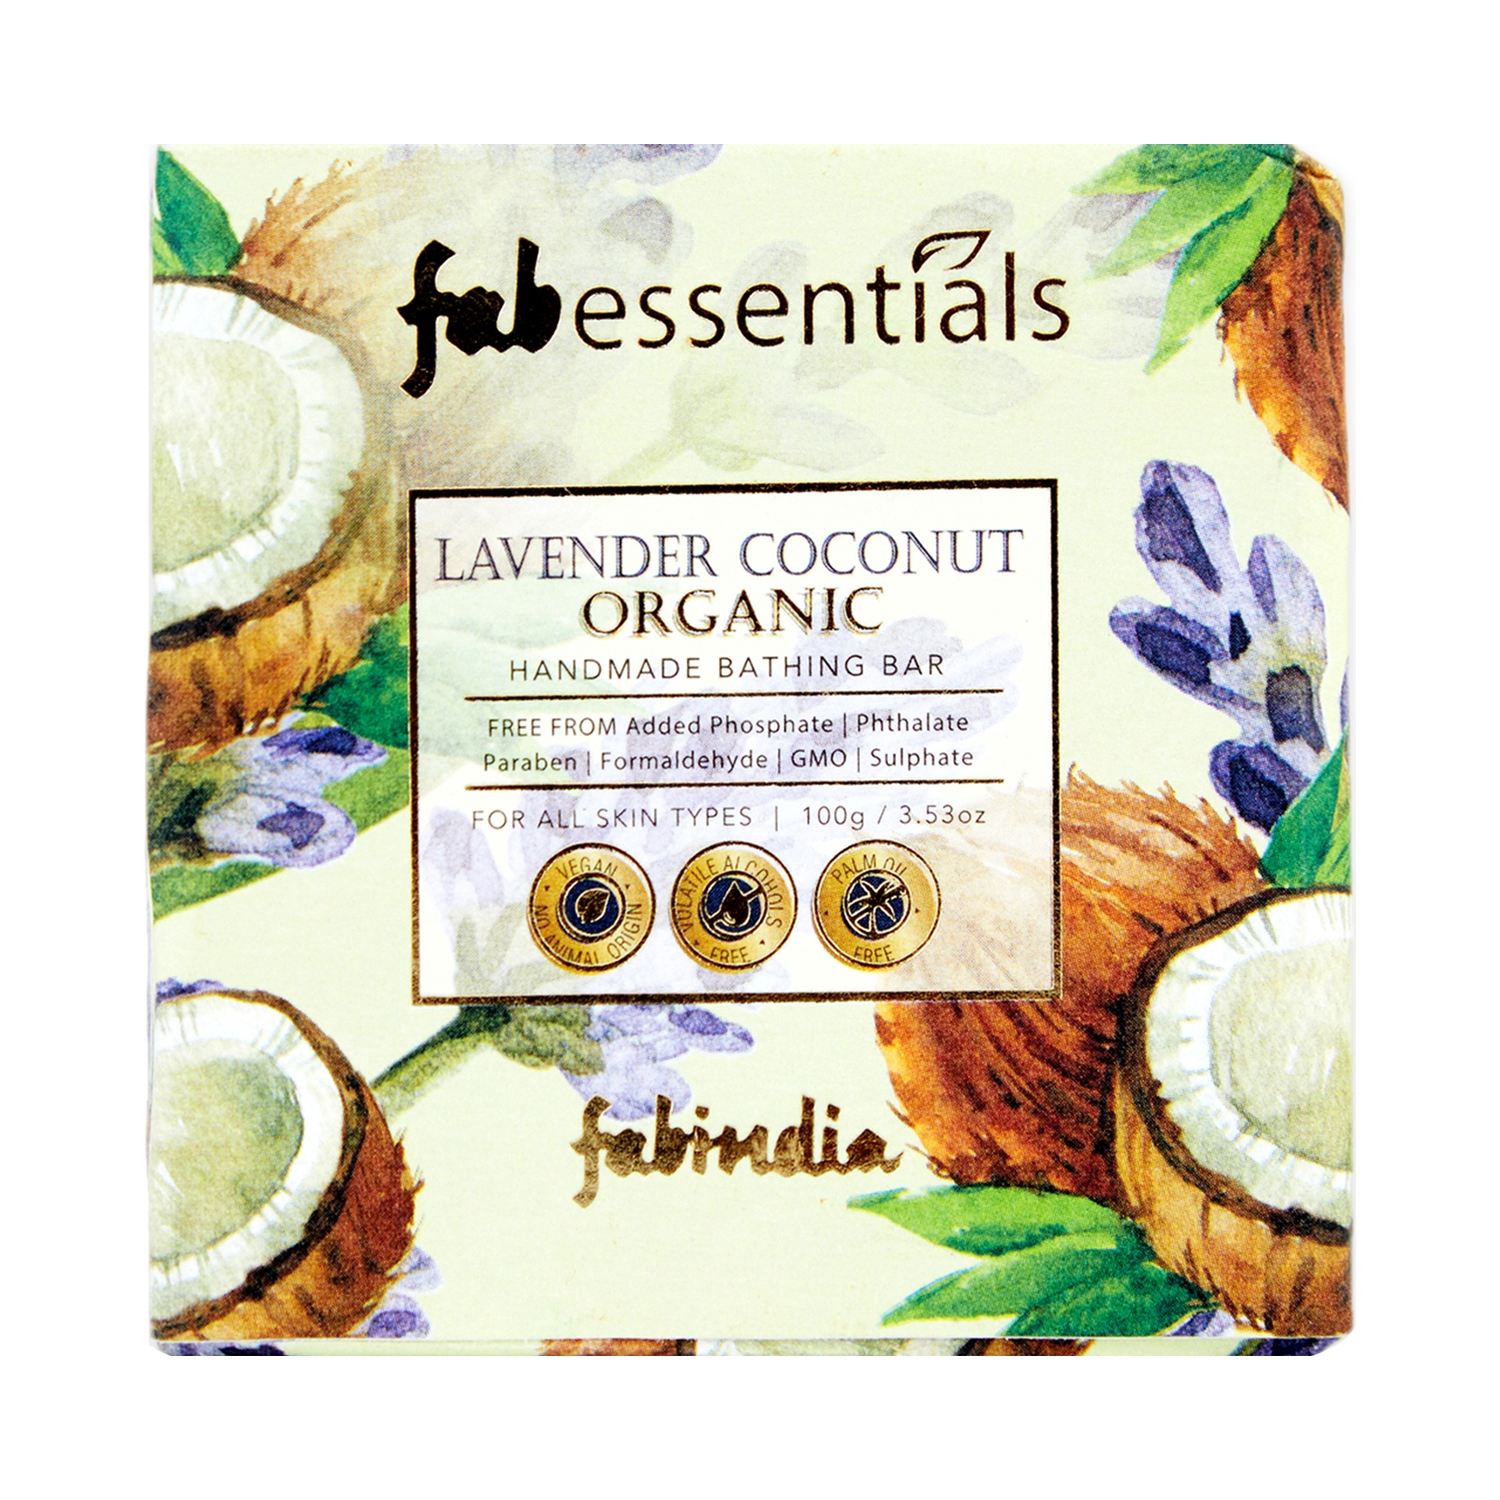 Fabessentials by Fabindia Lavender Coconut 100% Organic Handmade Bathing Bar With Goodness Of Vitamin E (100g)